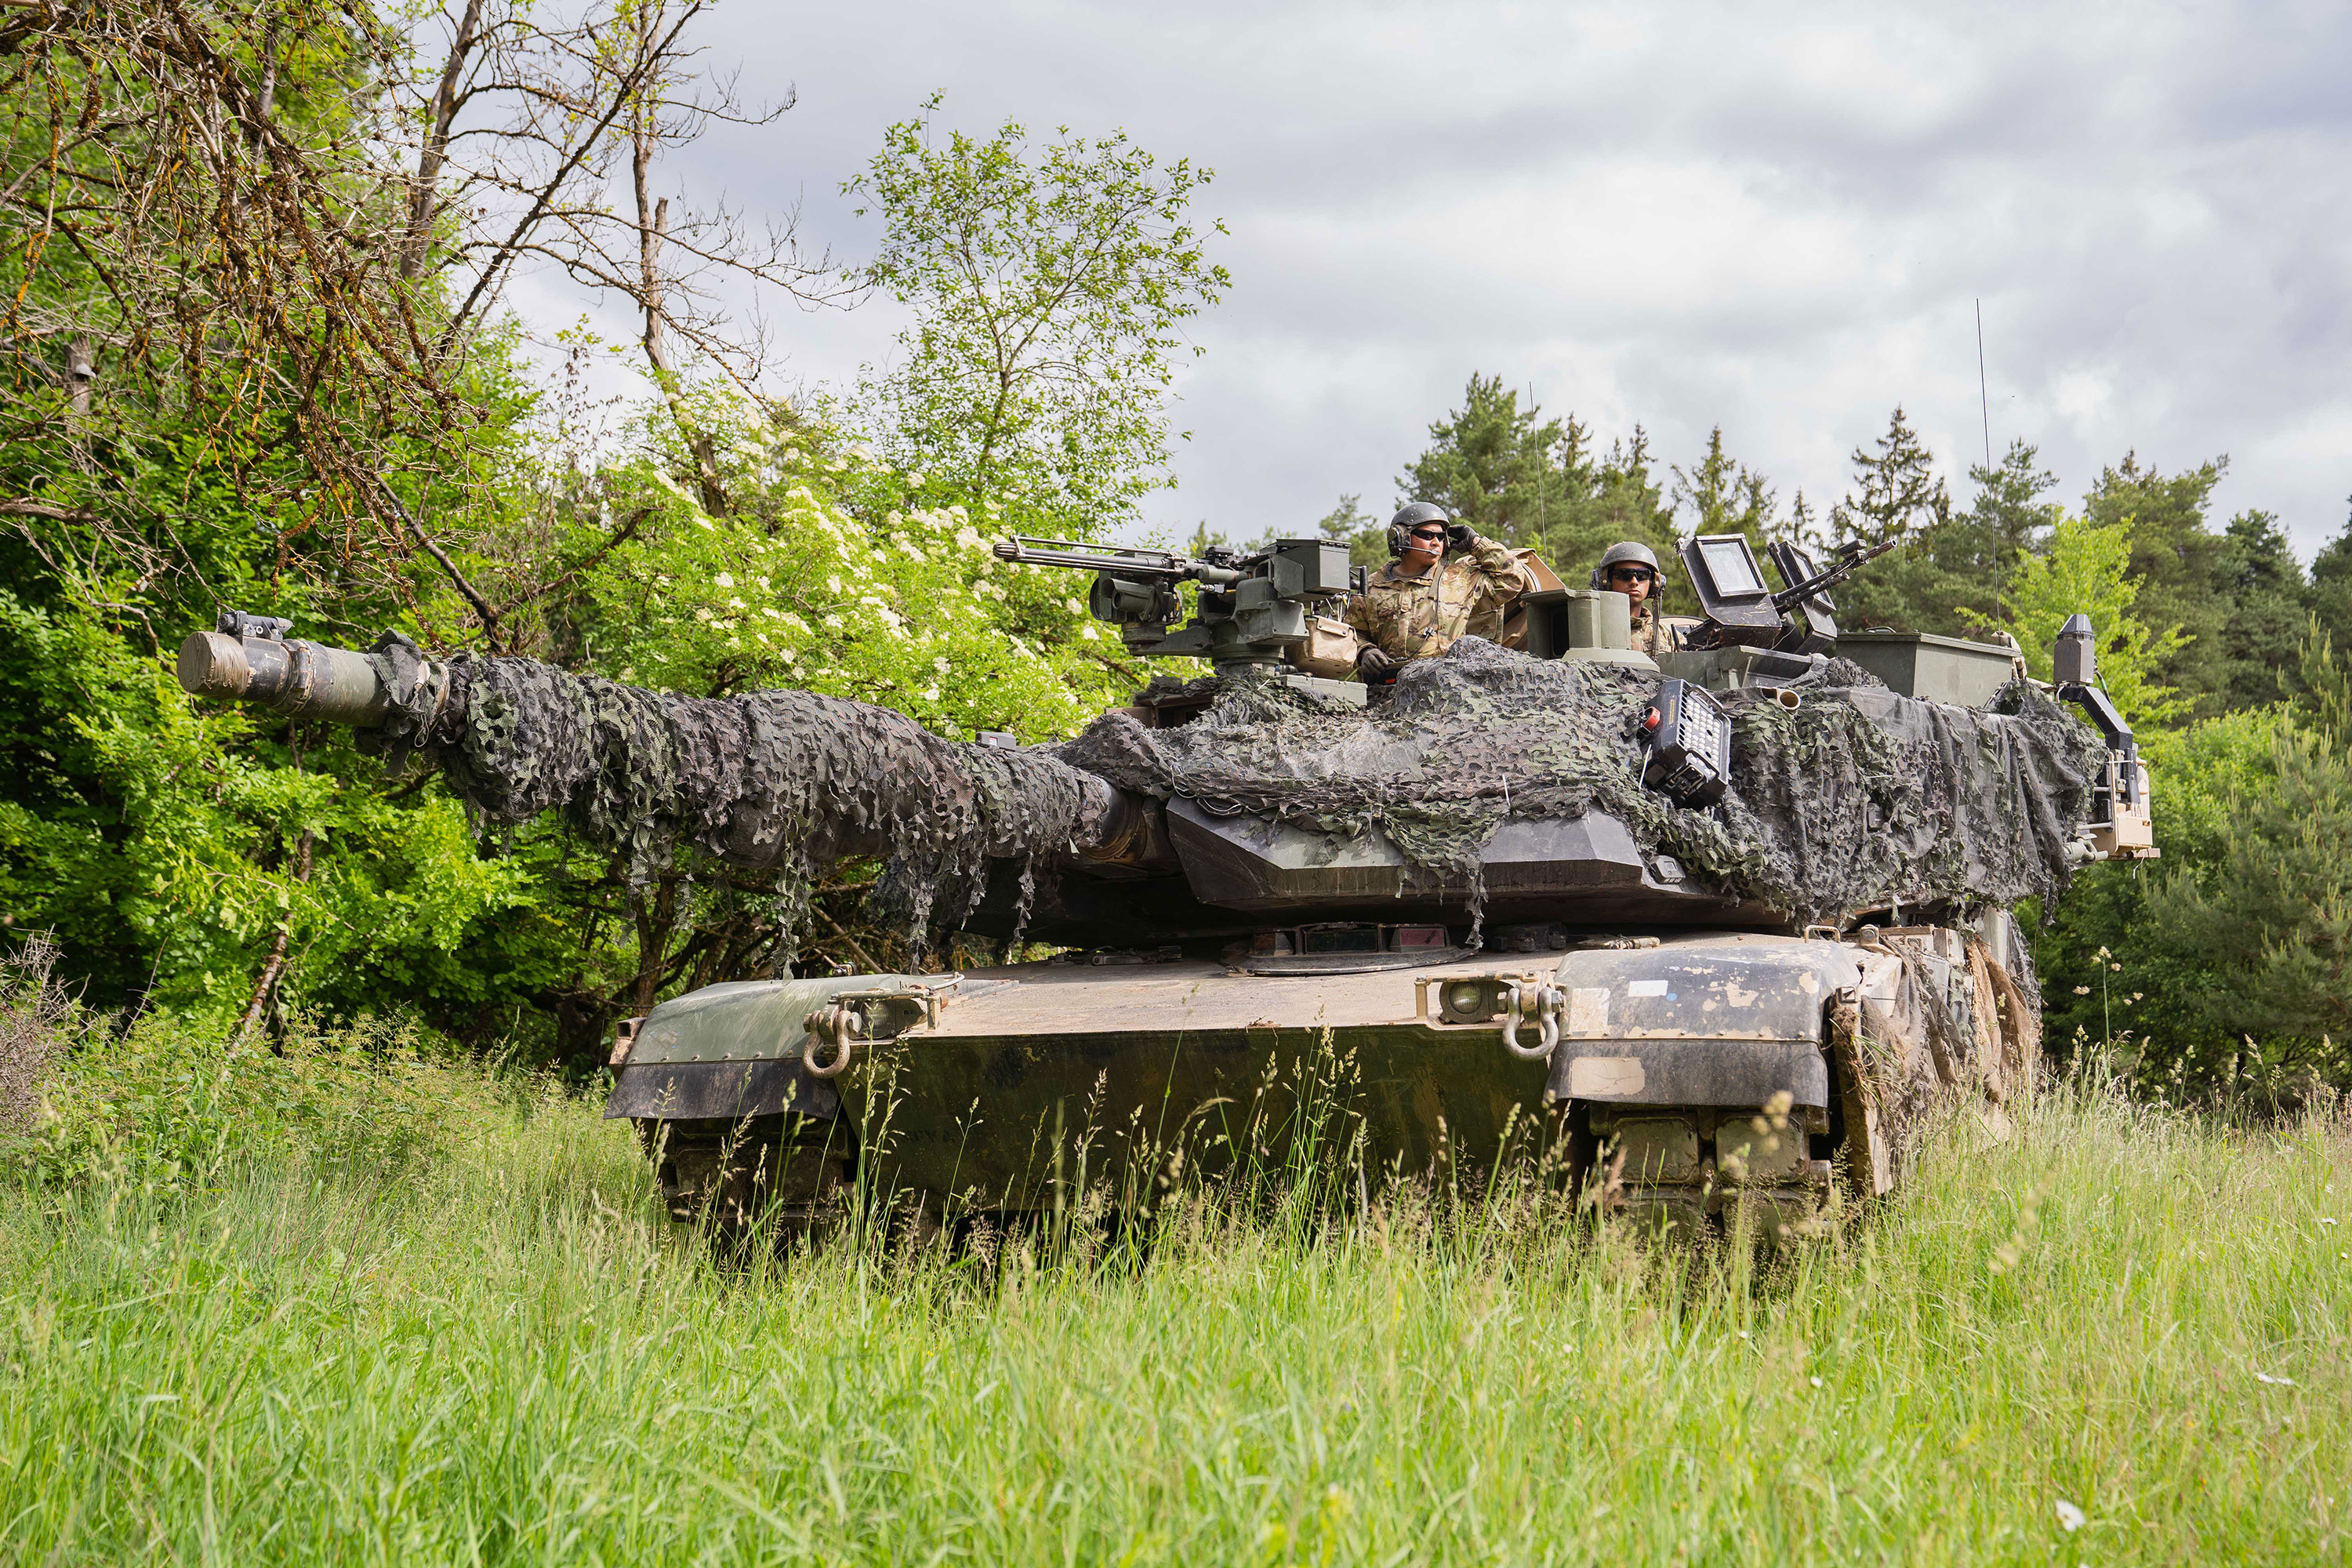 U.S. soldiers stand next to an M1 Abrams tank in a wooded area during a multinational exercise in June 2022 in Hohenfels, Germany.